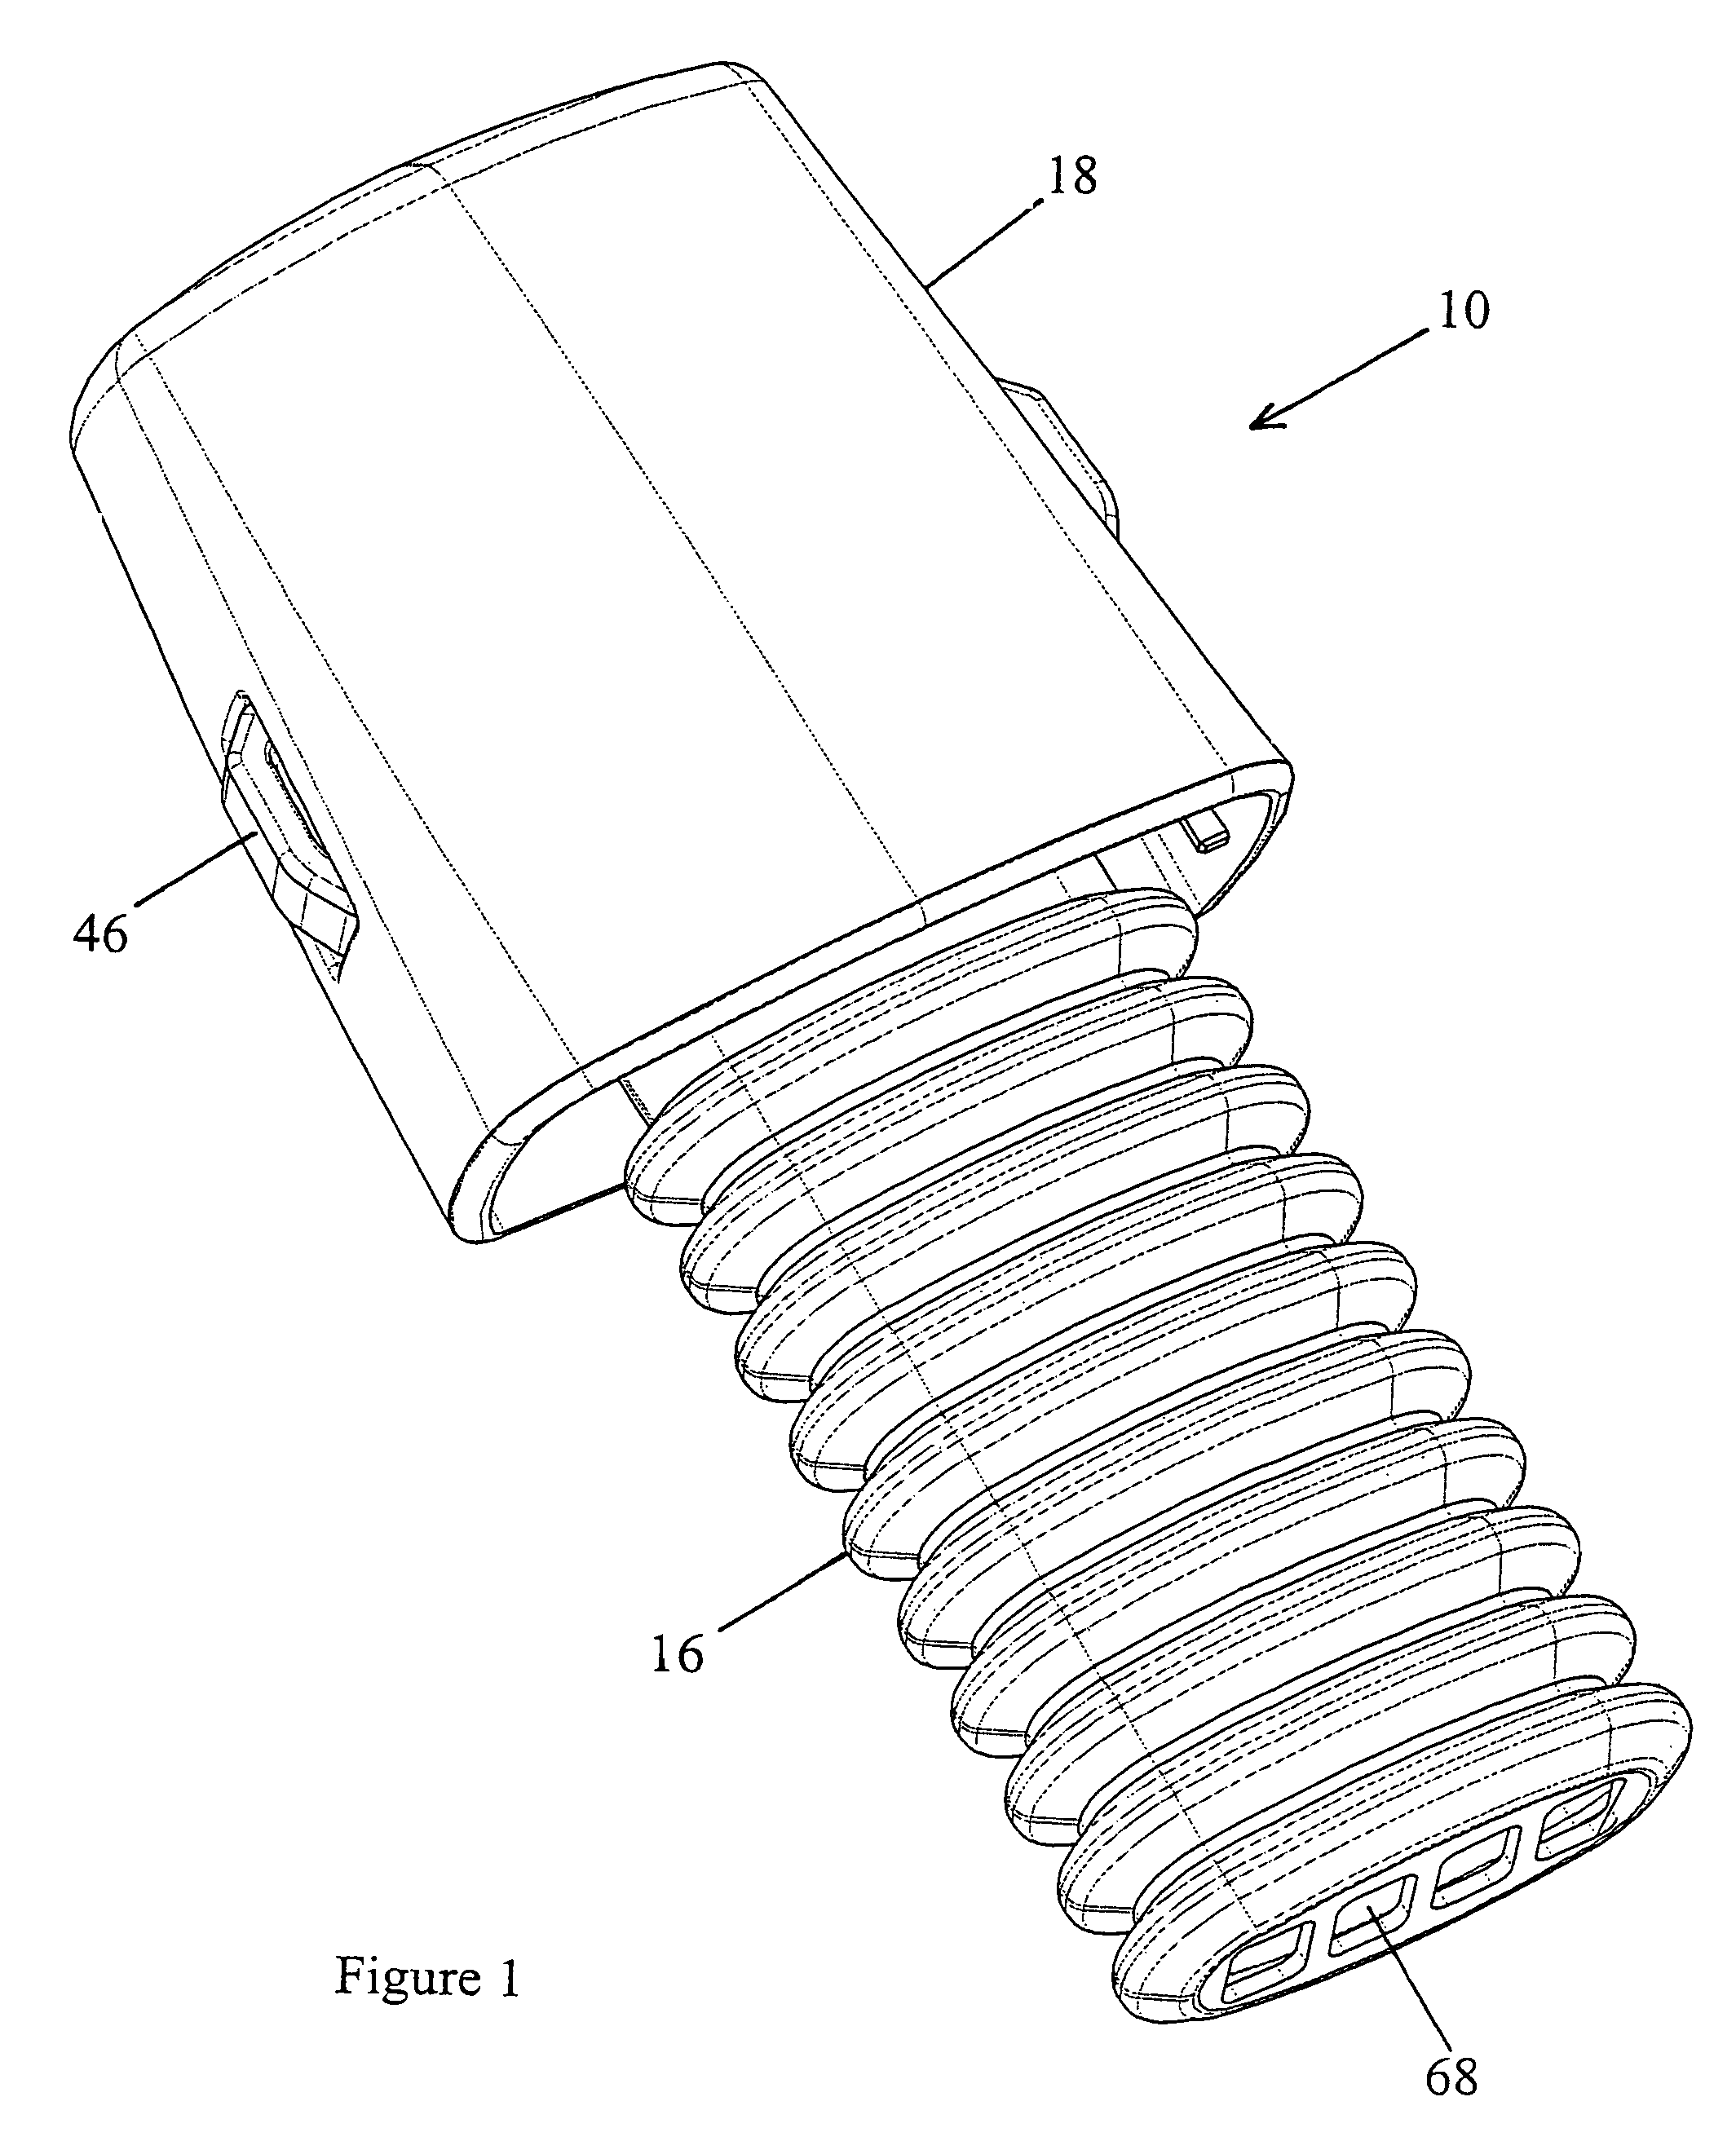 Oral fluid collection, transfer and transportation device and method